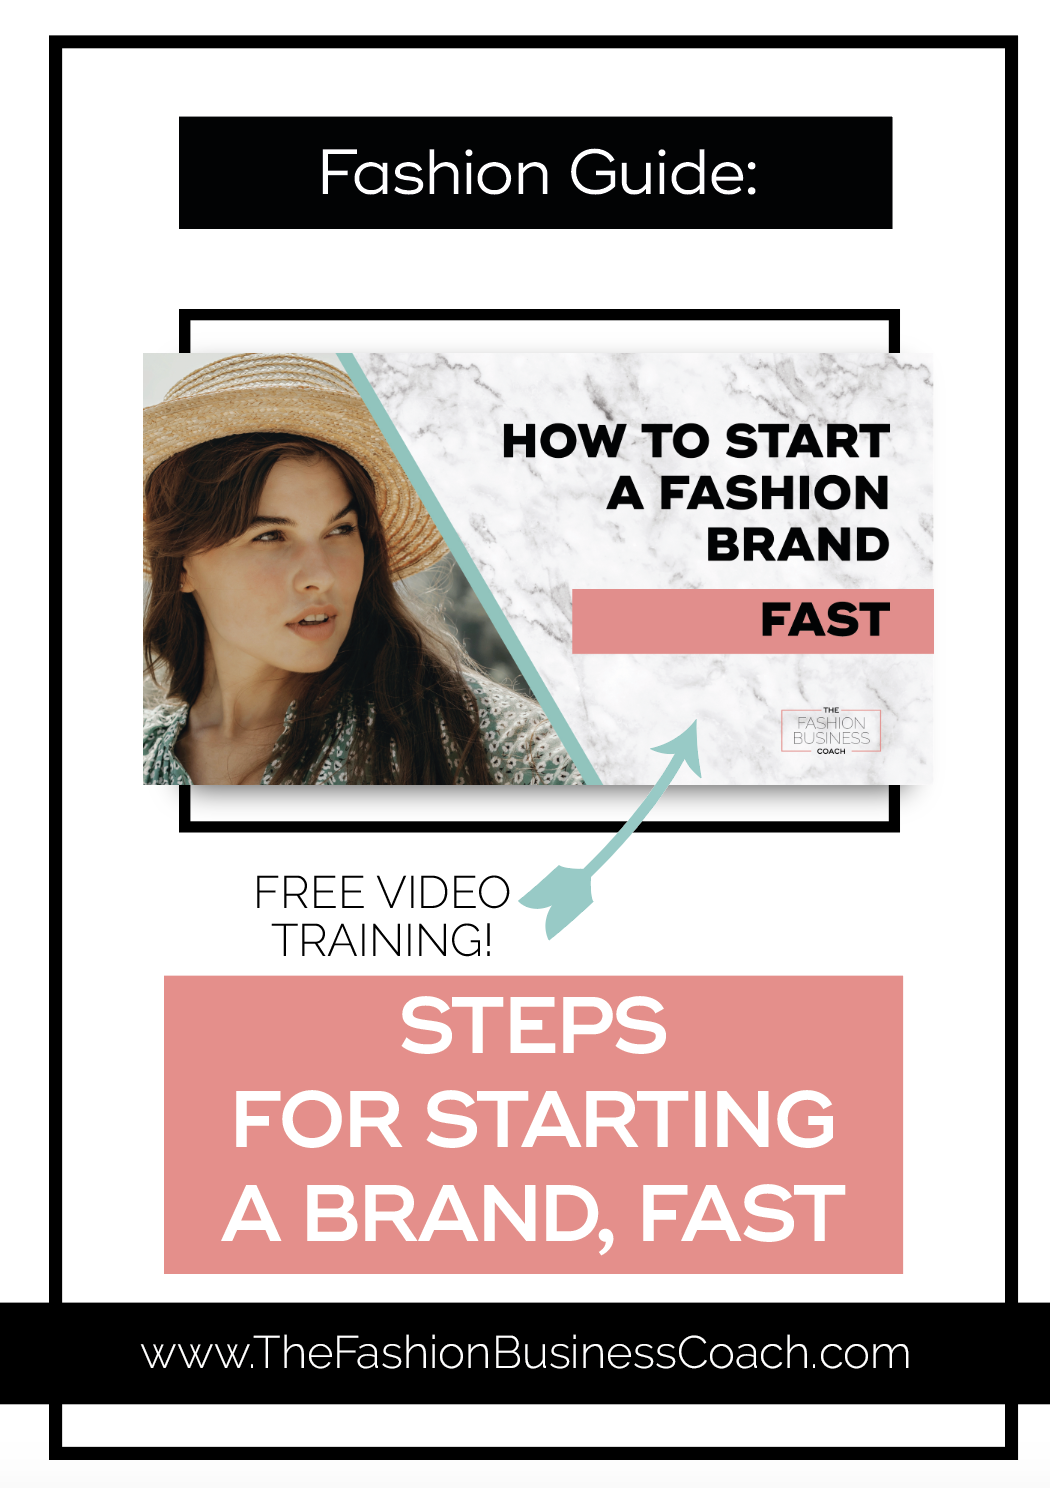 Fashion Guide Steps for Starting a Brand, Fast 3.png